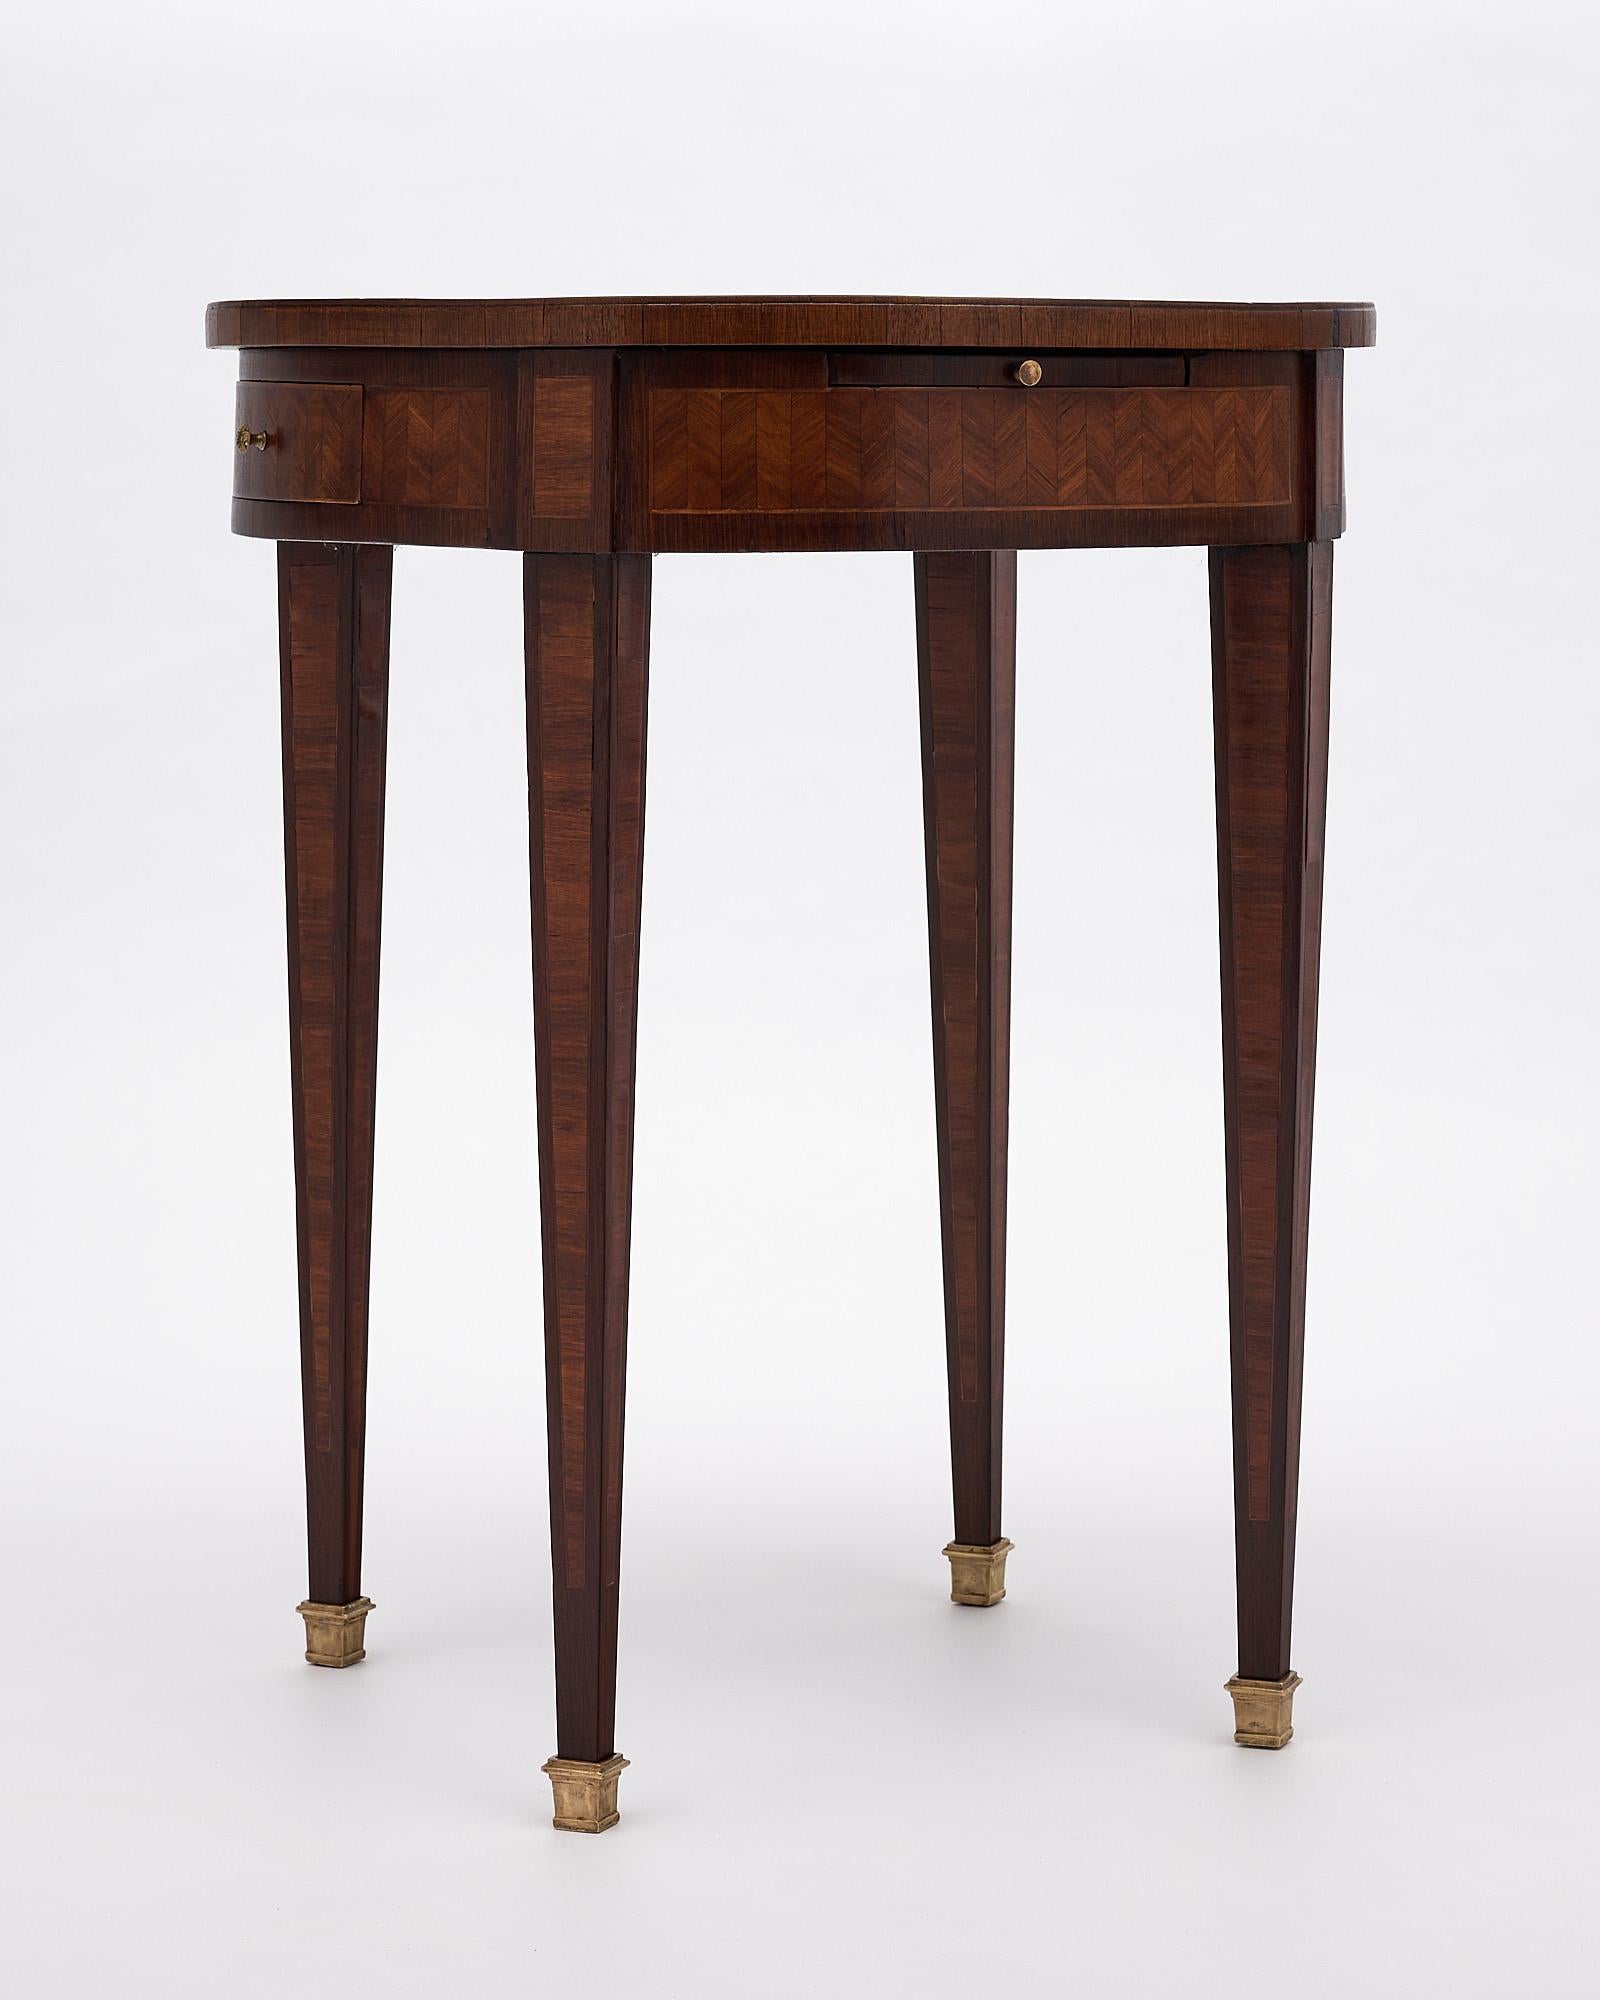 Table, “bouillotte”, French, made of rosewood with a beautiful, intricate parquetry work on the top and apron. There are two drawers and two tablets. It is finished in a lustrous museum quality French polish and is supported on brass feet.